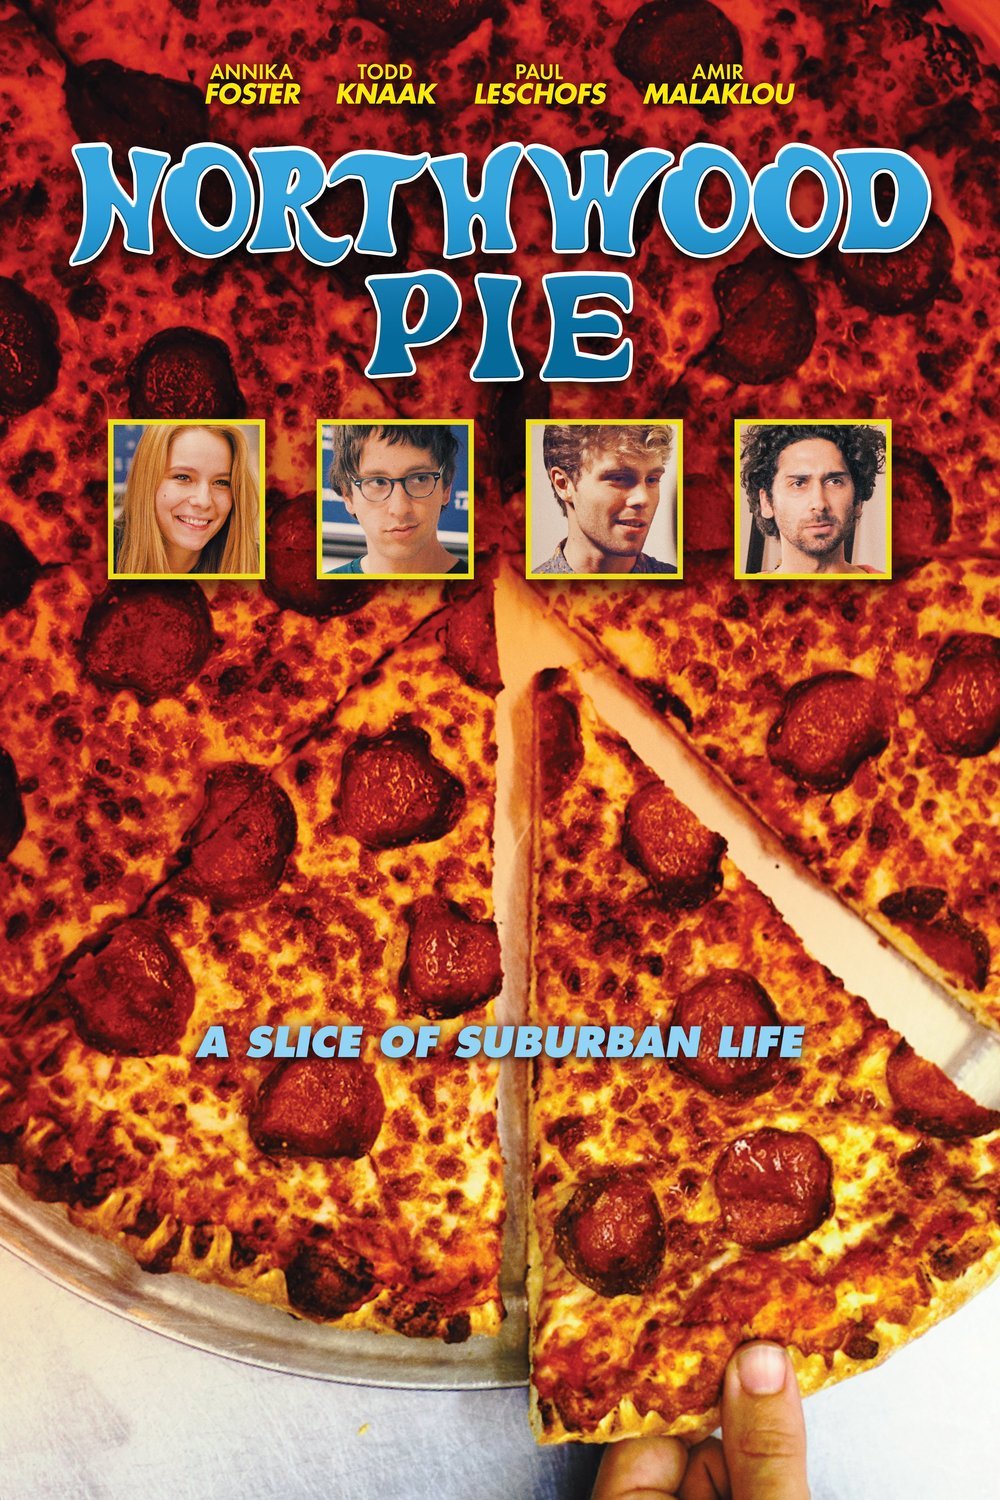 Poster of the movie Northwood Pie